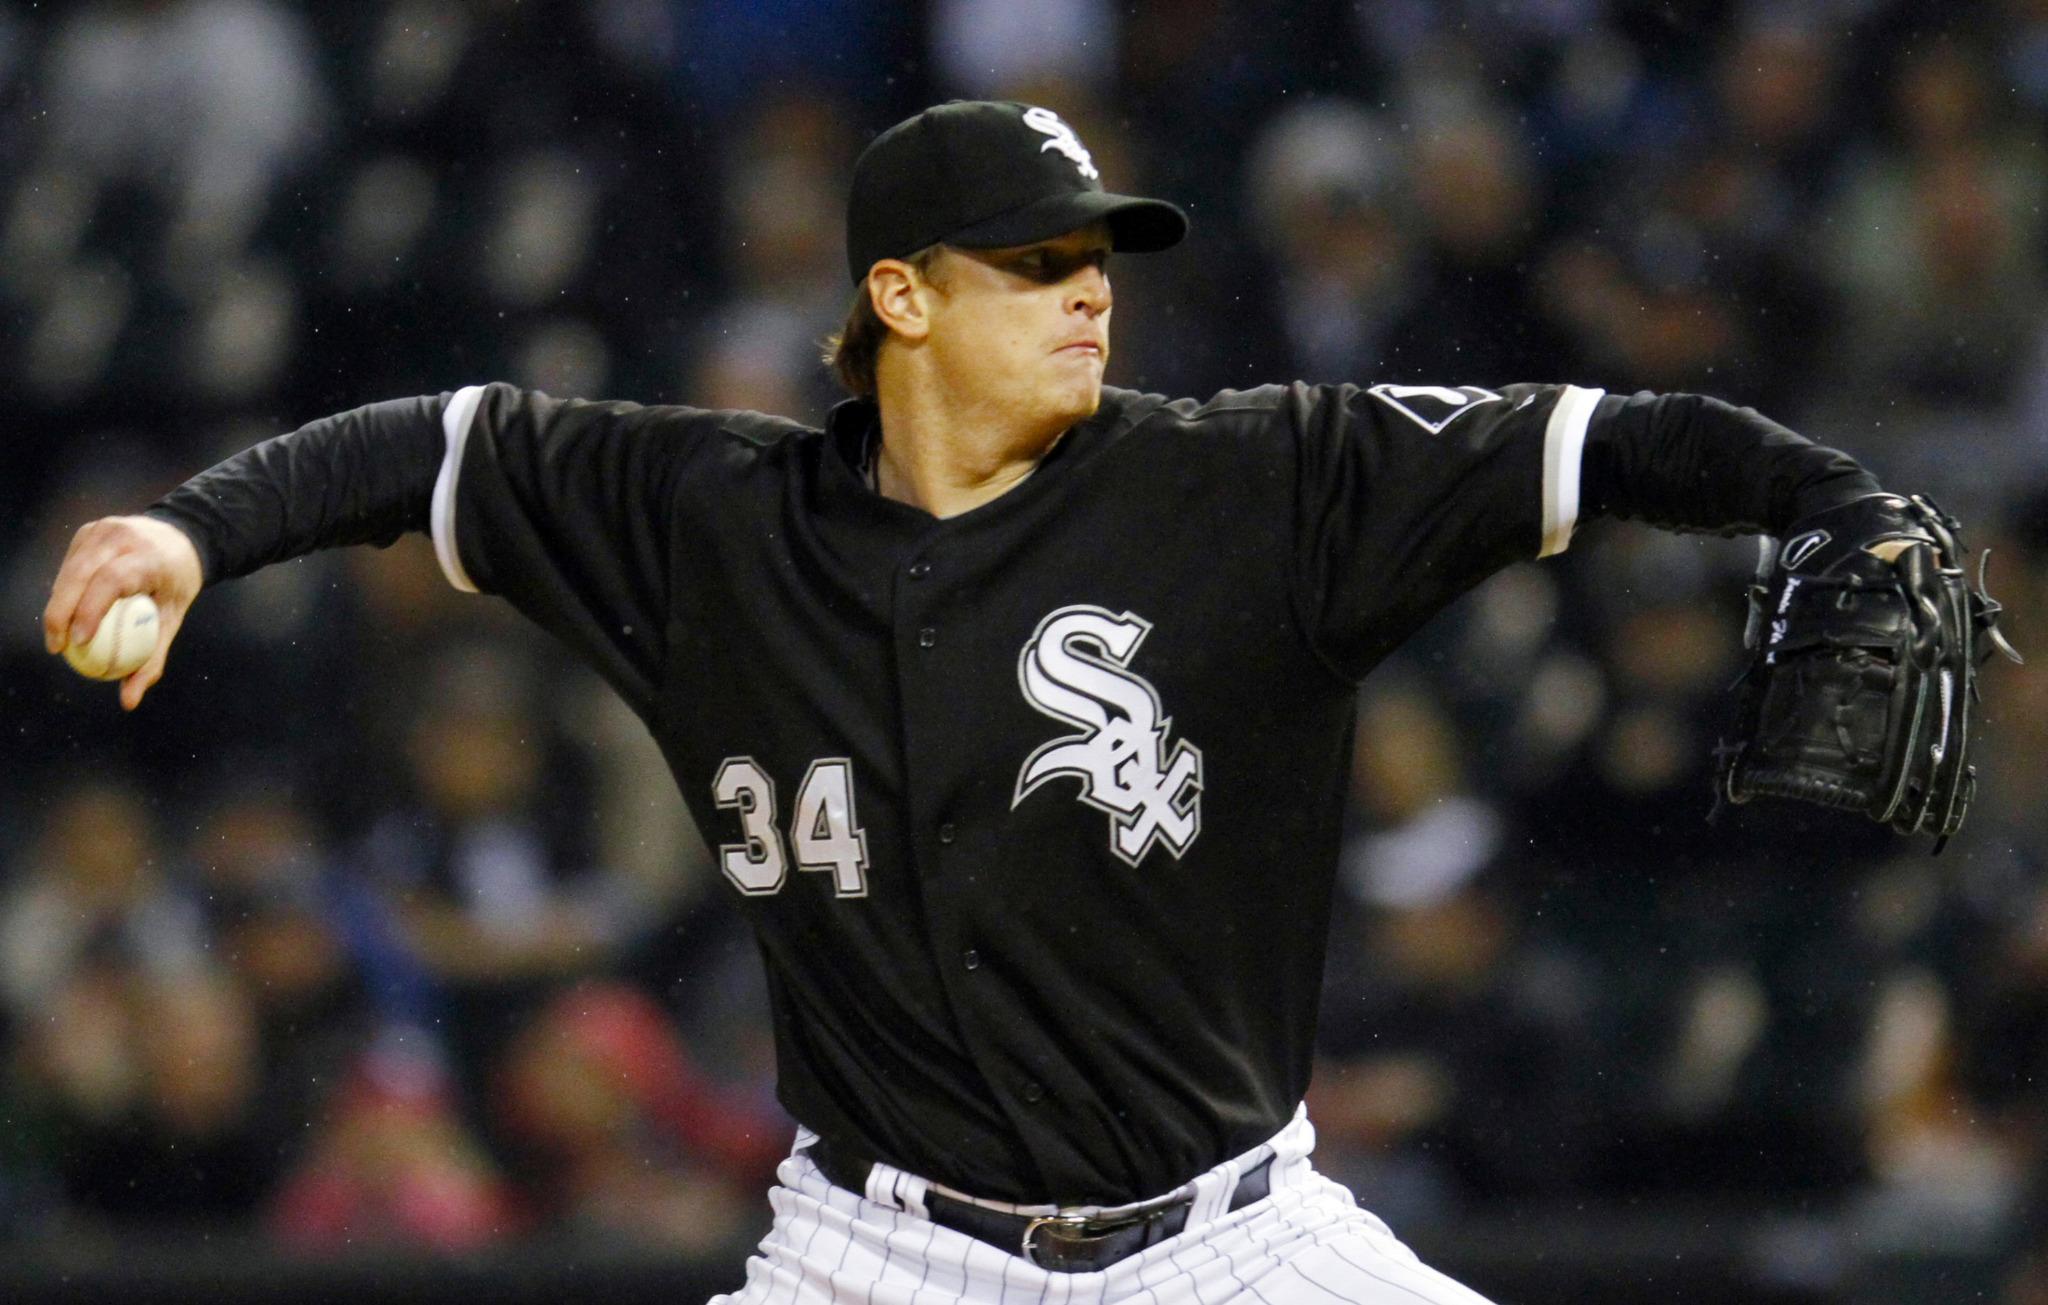 Happy 32nd Birthday to former Gavin Floyd! A Sox 2007-2013, he had a 4.22 ERA in 175 games and 1042.2 IP. 